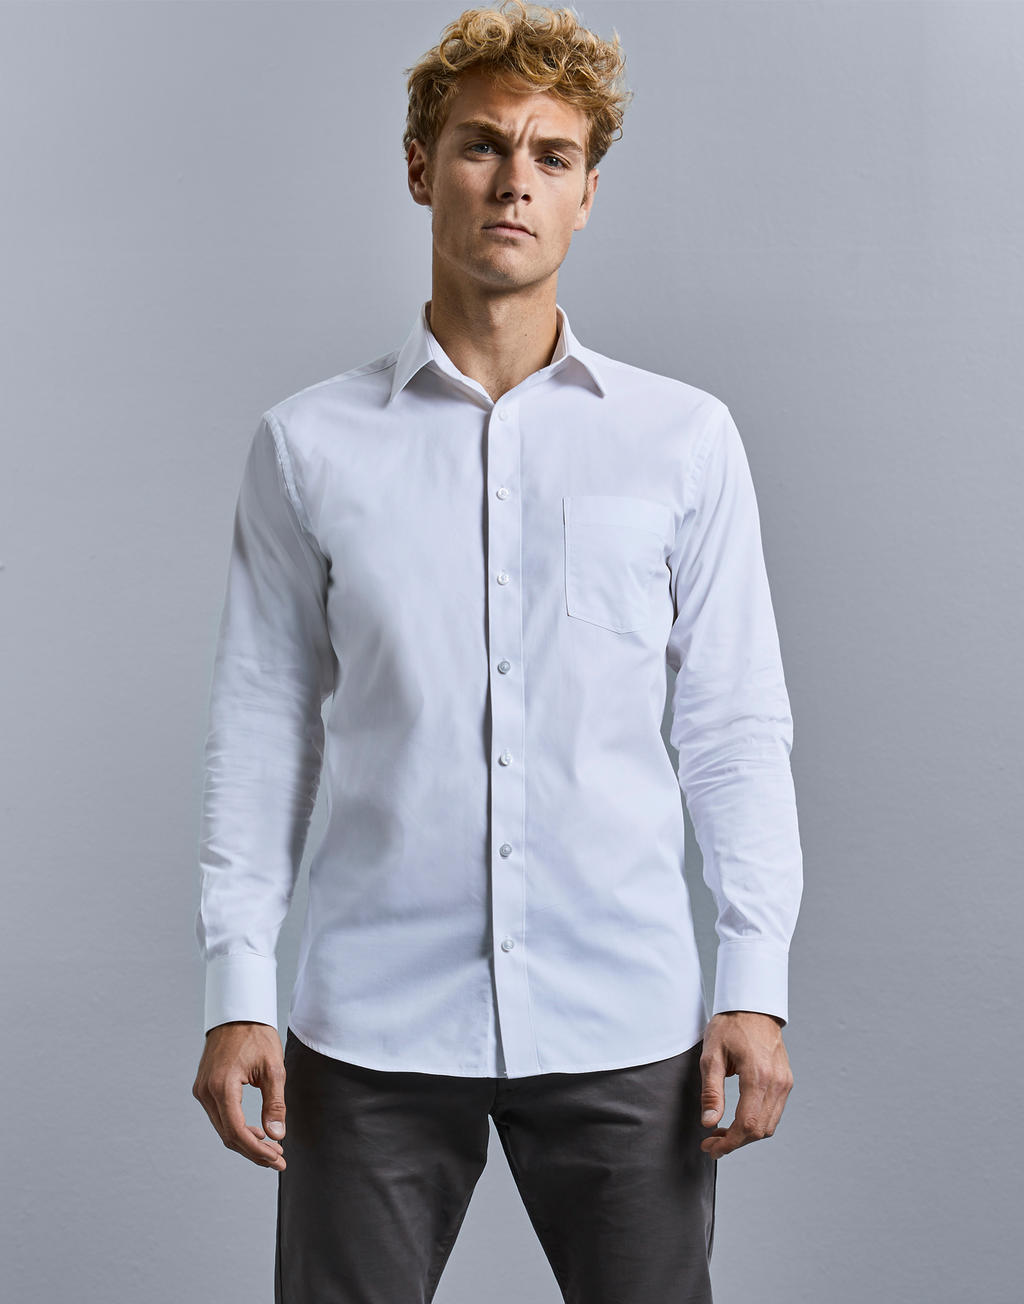  Mens LS Tailored Coolmax? Shirt in Farbe White